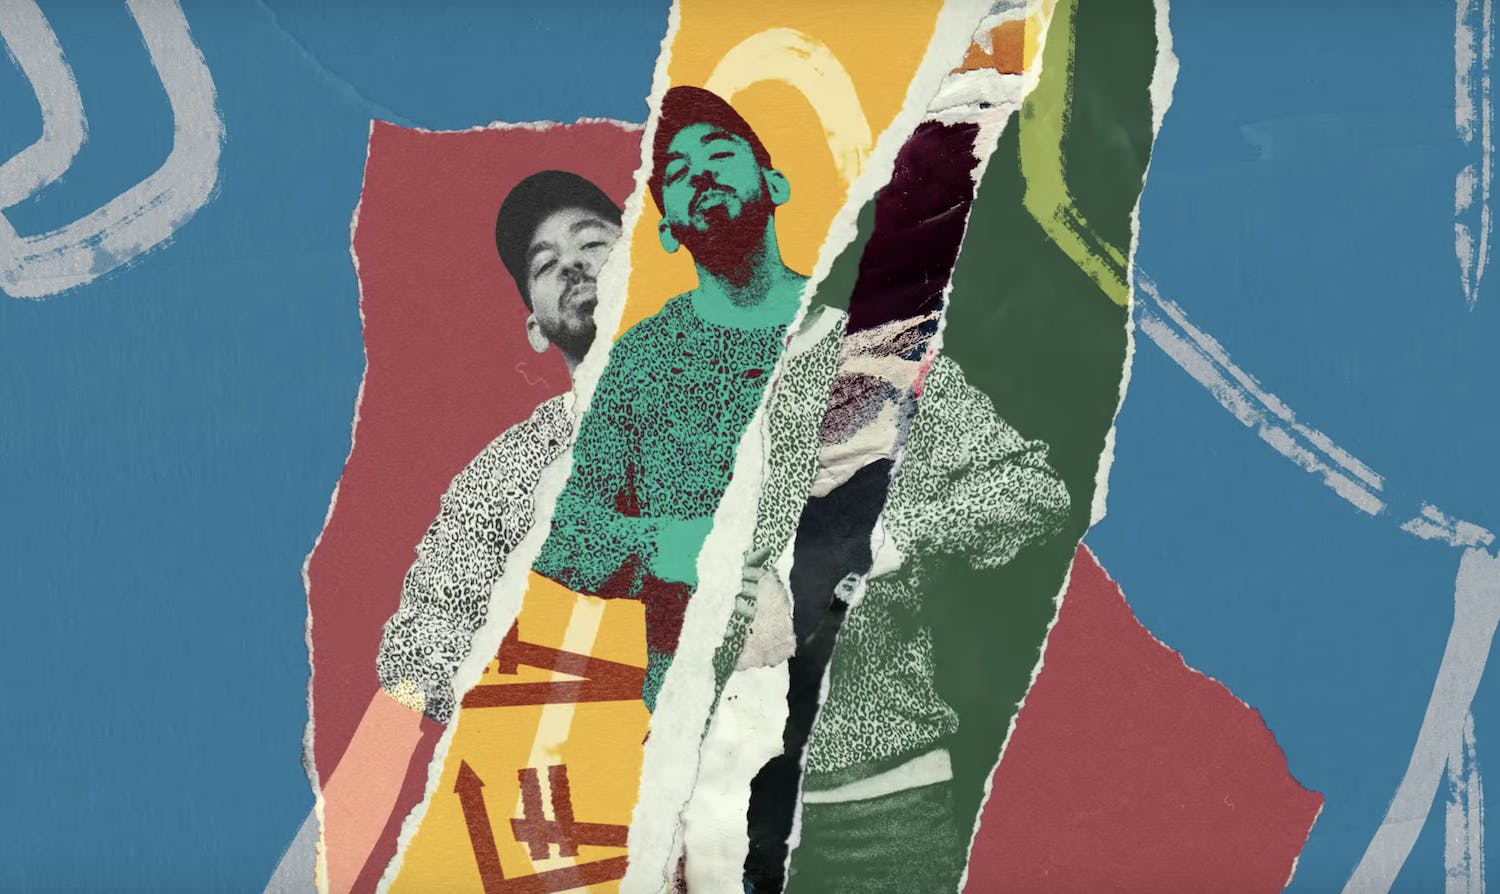 Mike Shinoda’s new video is all kinds of collage-y goodness